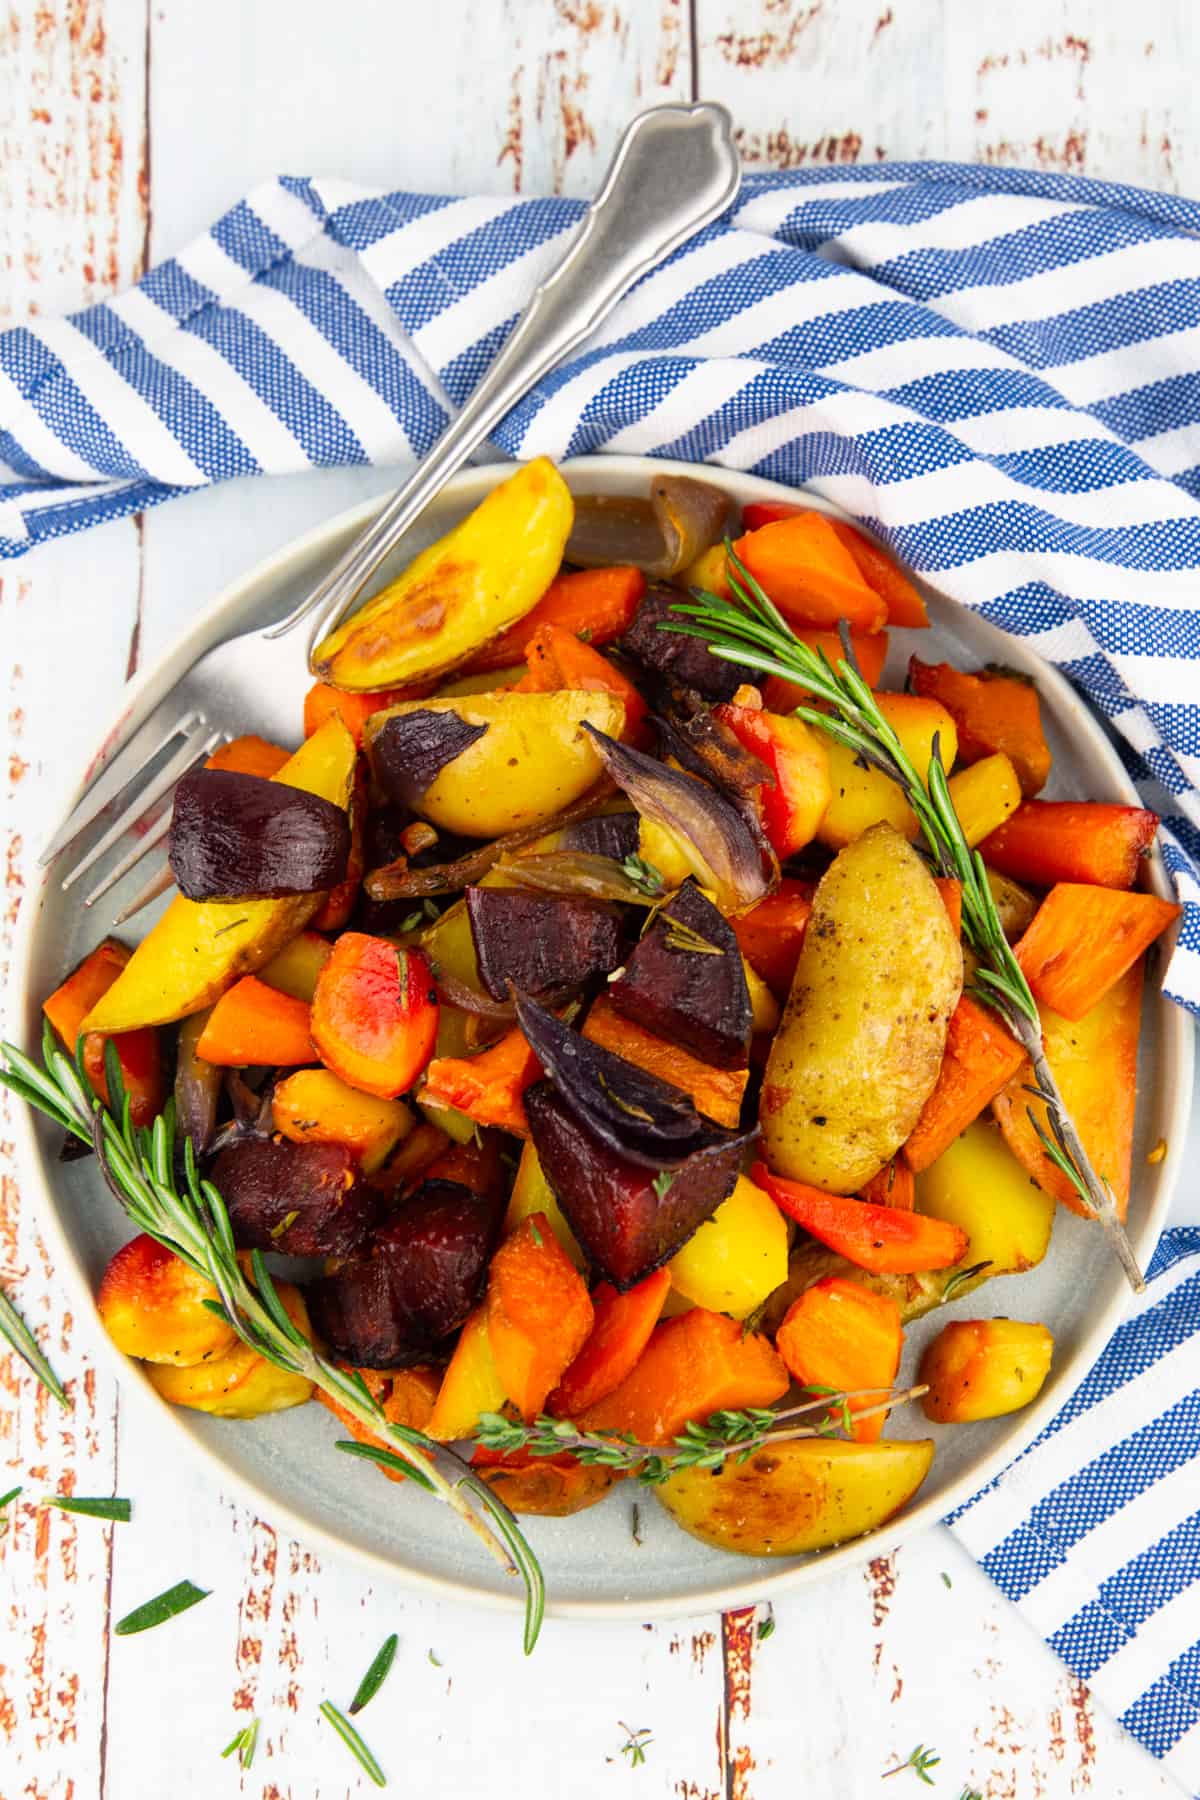 roasted veggies on a grey plate on a wooden board